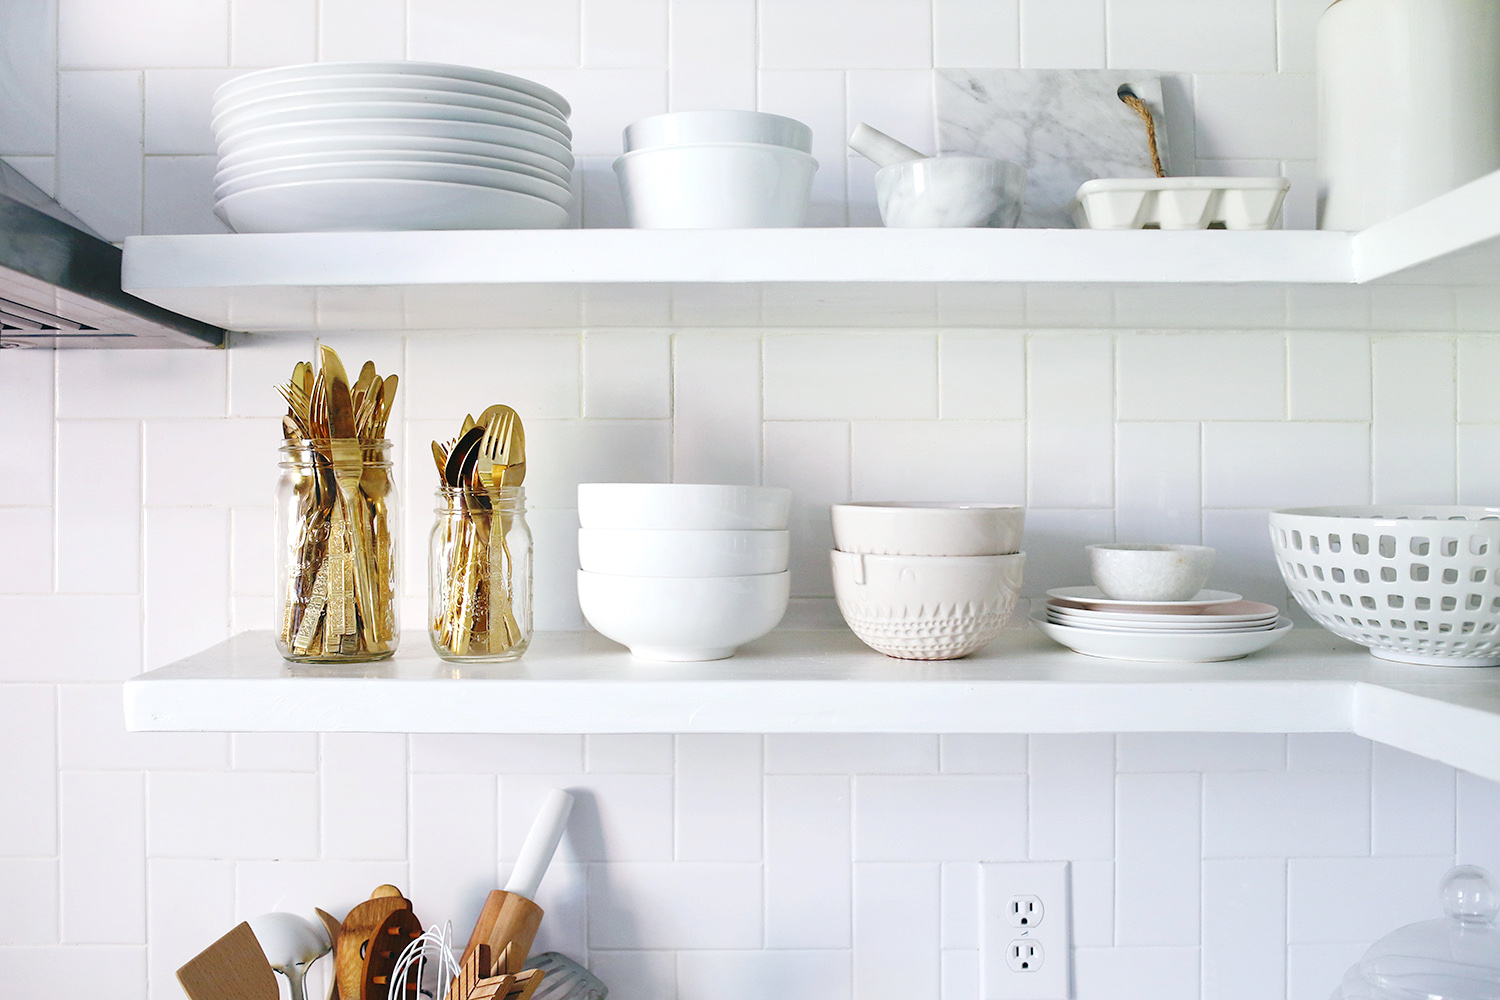 whiteshelves with white dishes on it and gold silverware in jars